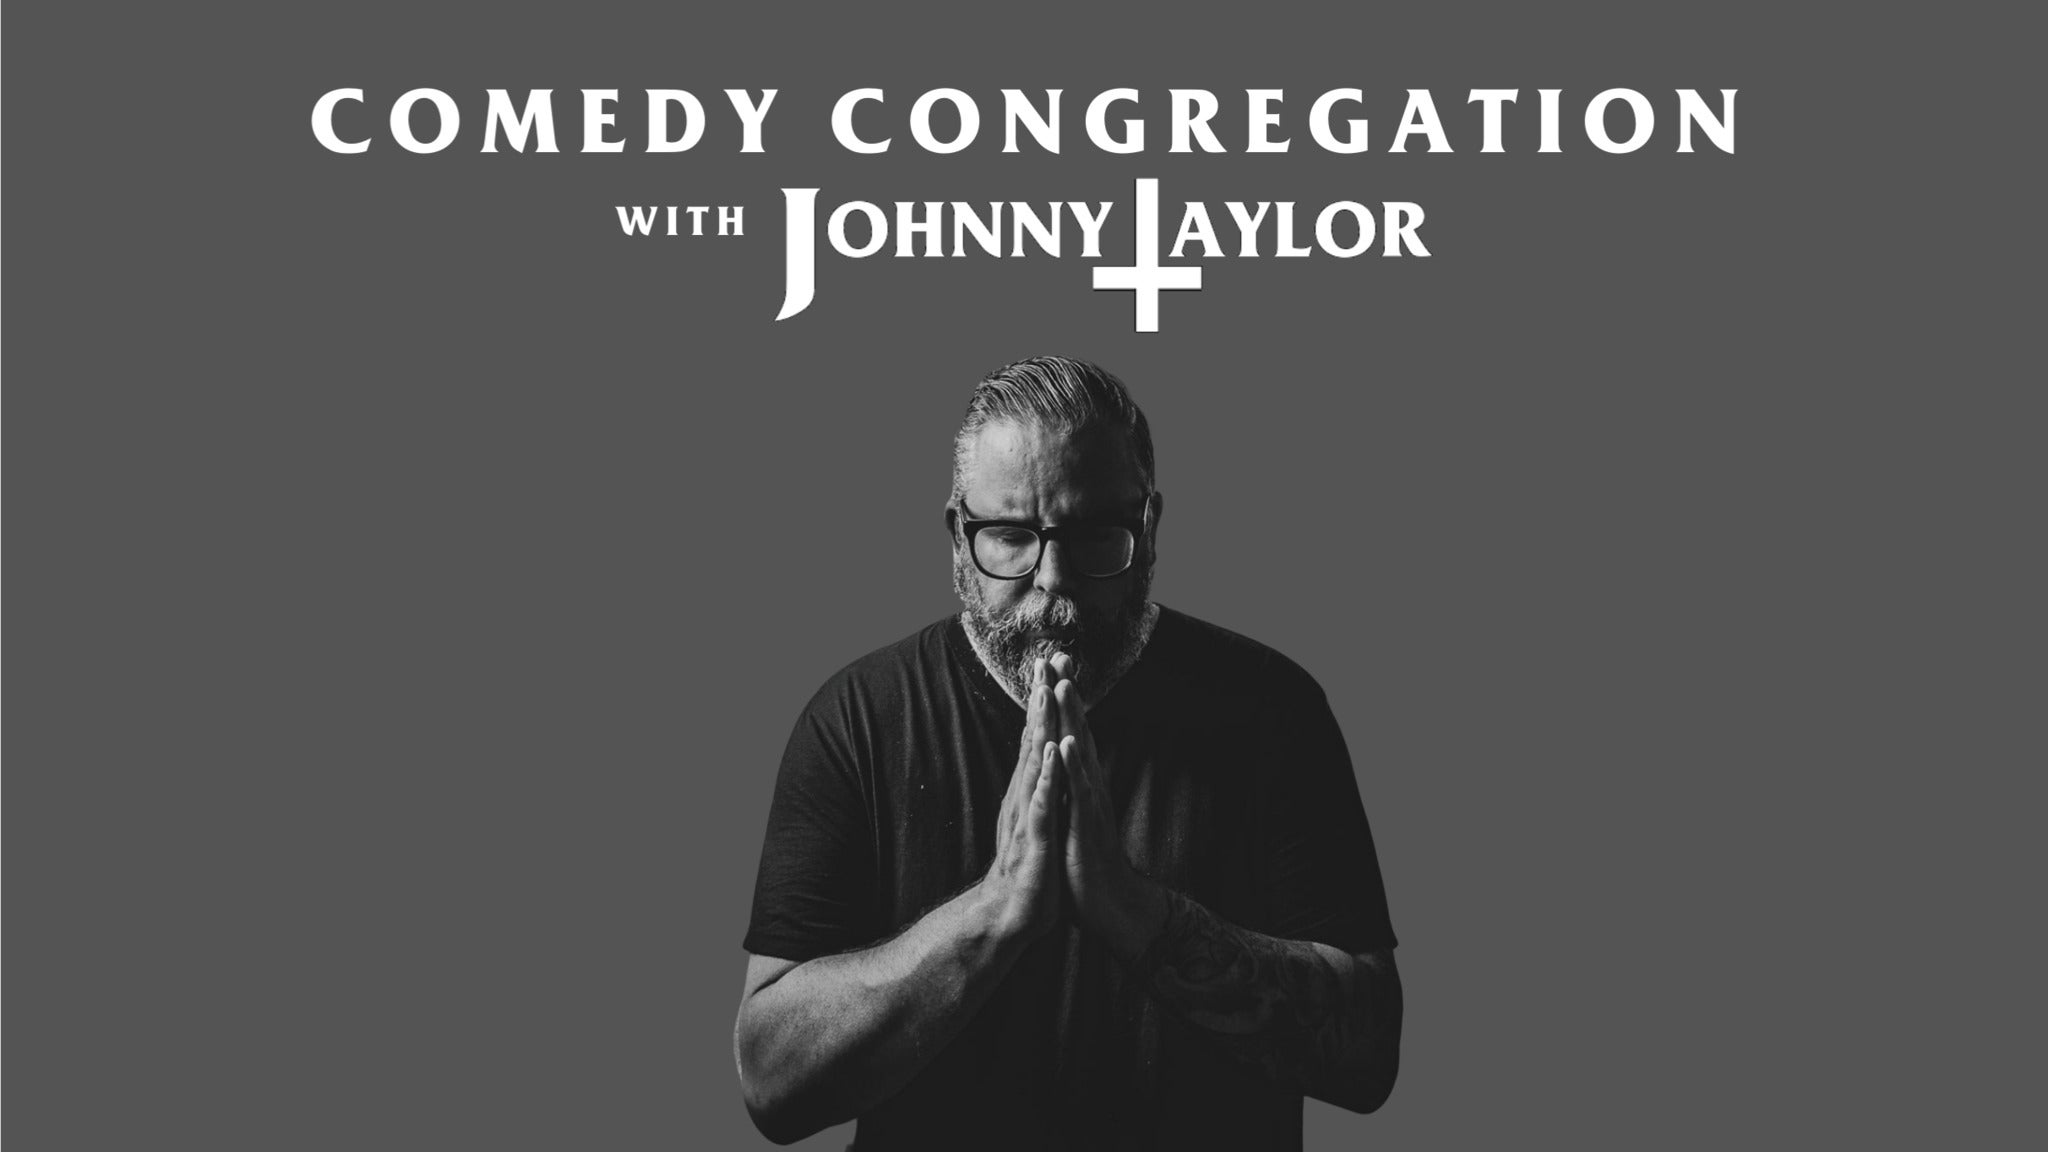 Comedy Congregation with Johnny Taylor